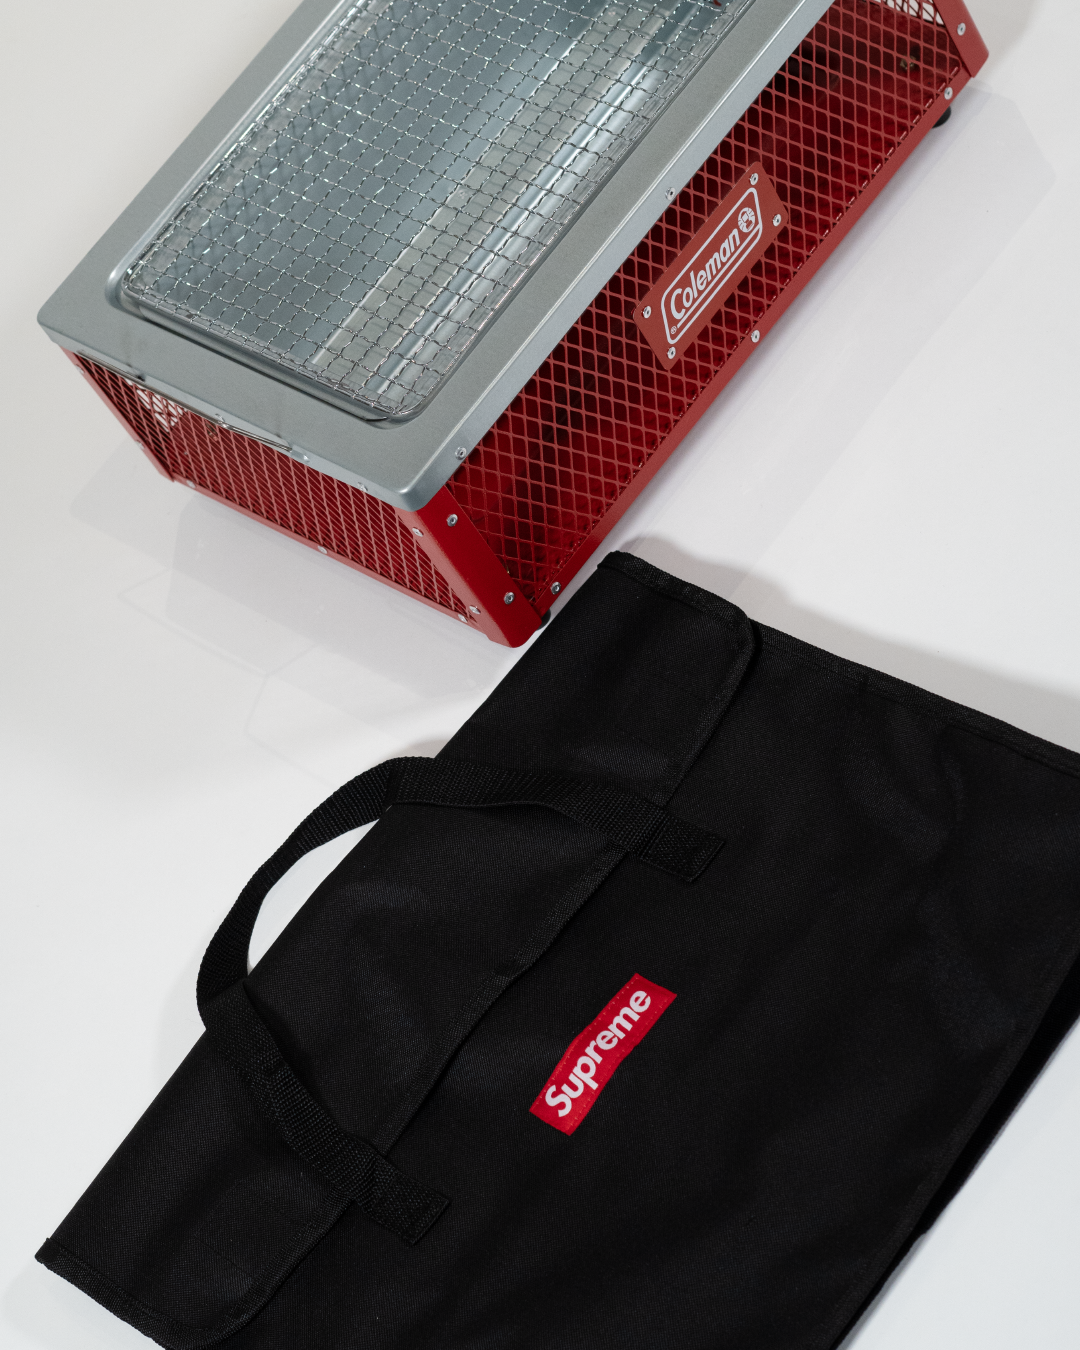 Supreme X Coleman Charcoal Grill